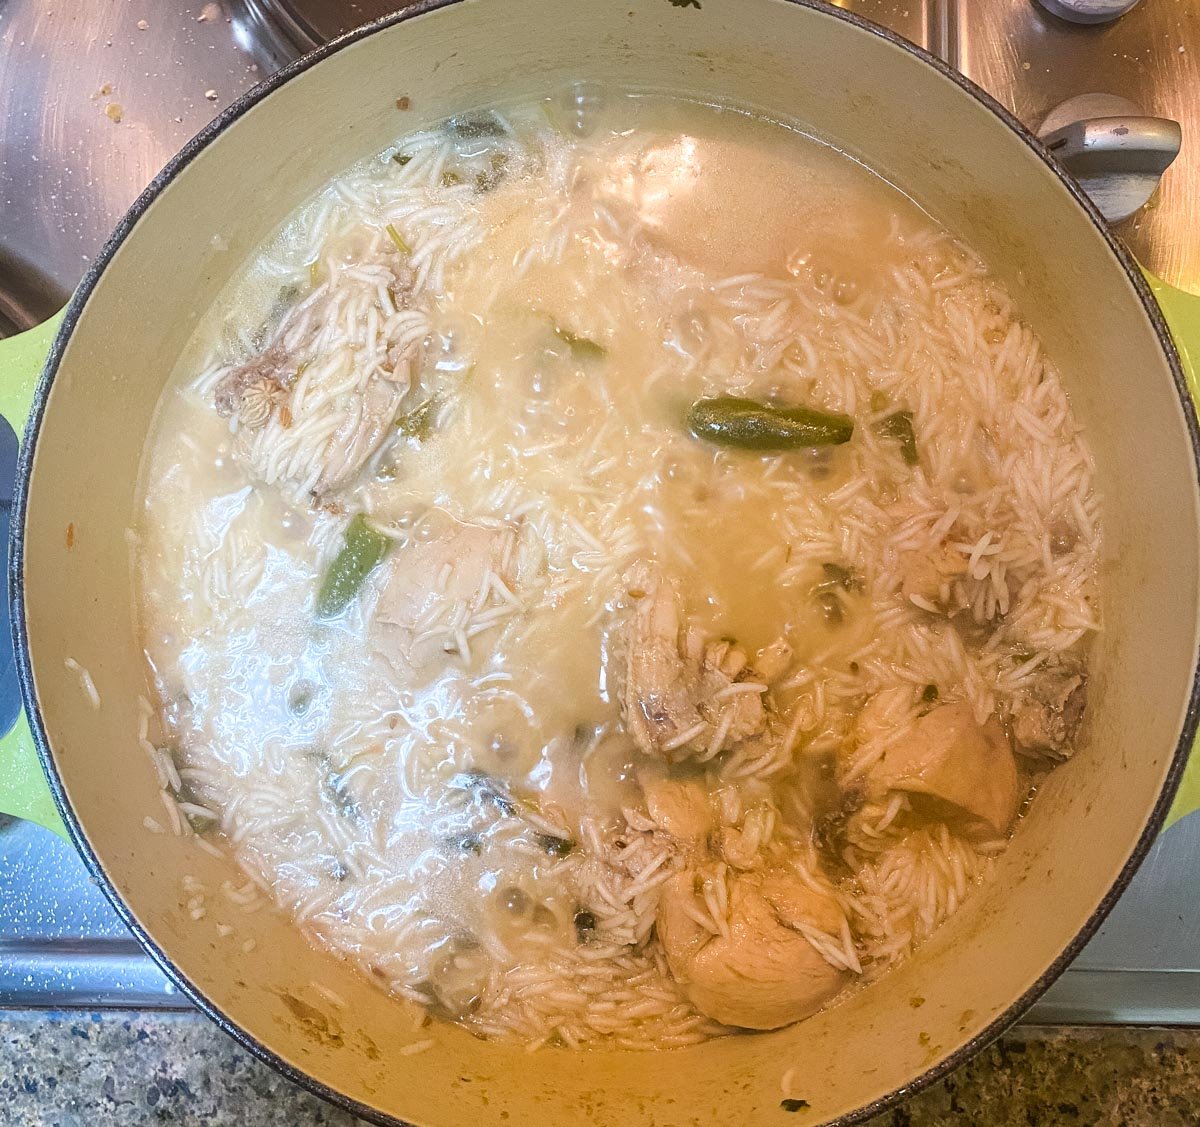 Almost cooked chicken pulao ready to be steamed on low heat.